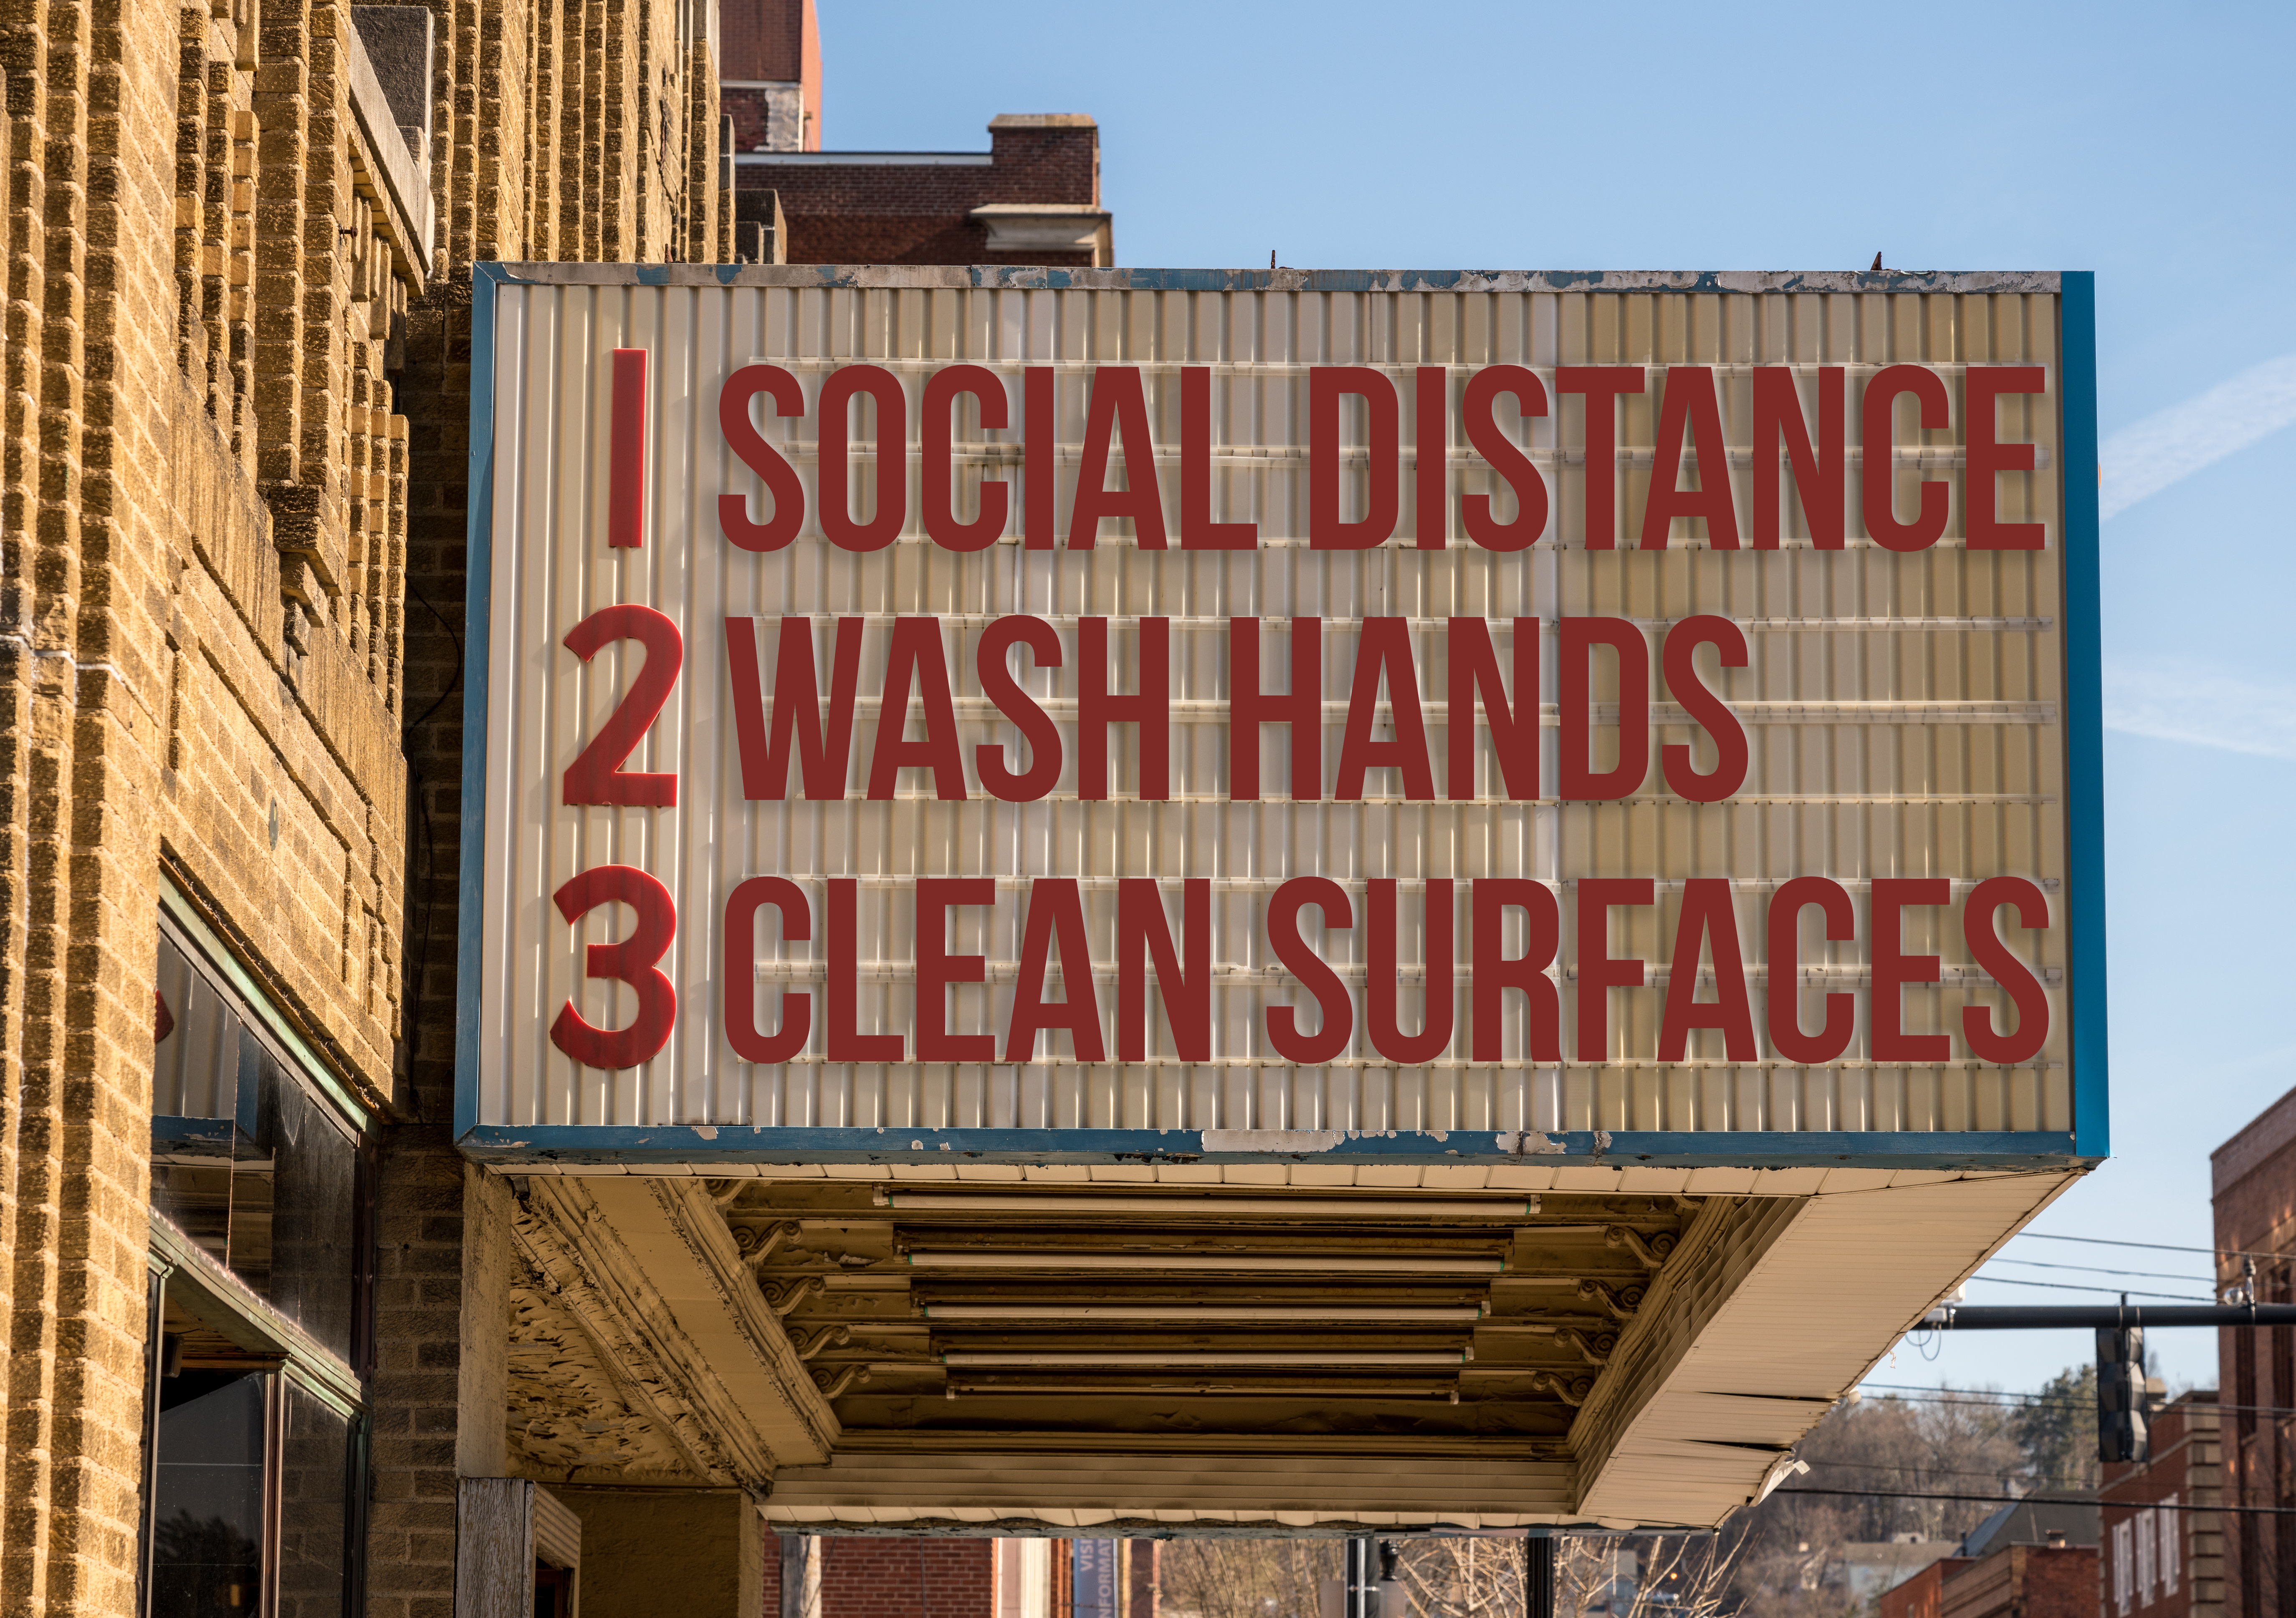 A cinema marquee listing three rules for pandemic safety: social distance, wash hands, and clean surfaces.